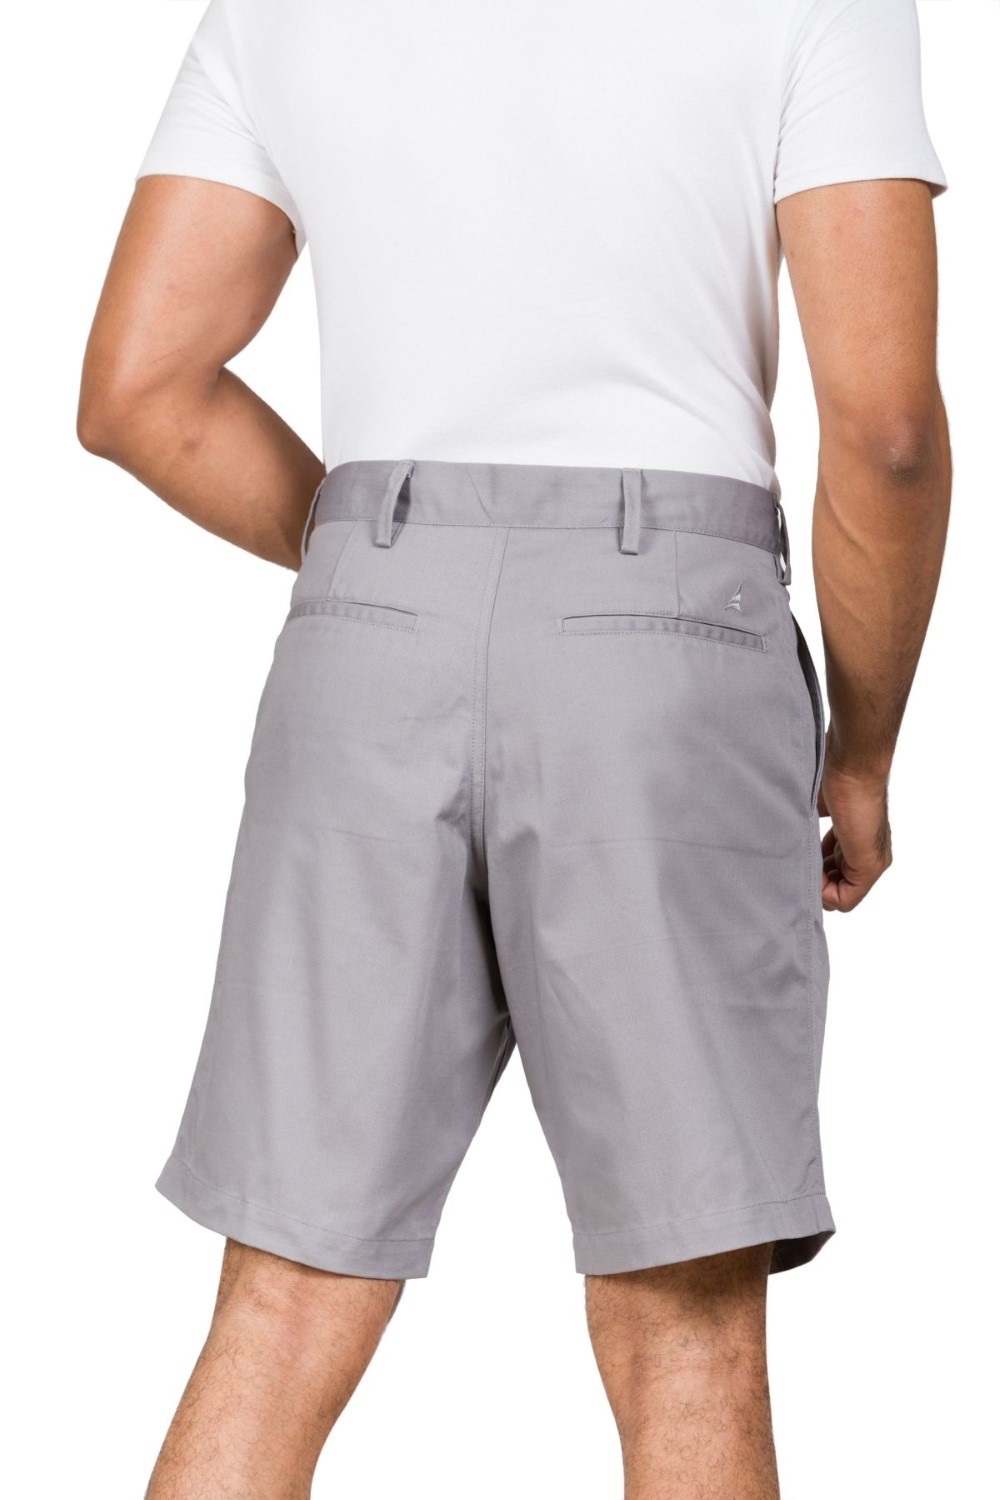 Comfort Fit Cotton Blend Pearl Grey Shorts